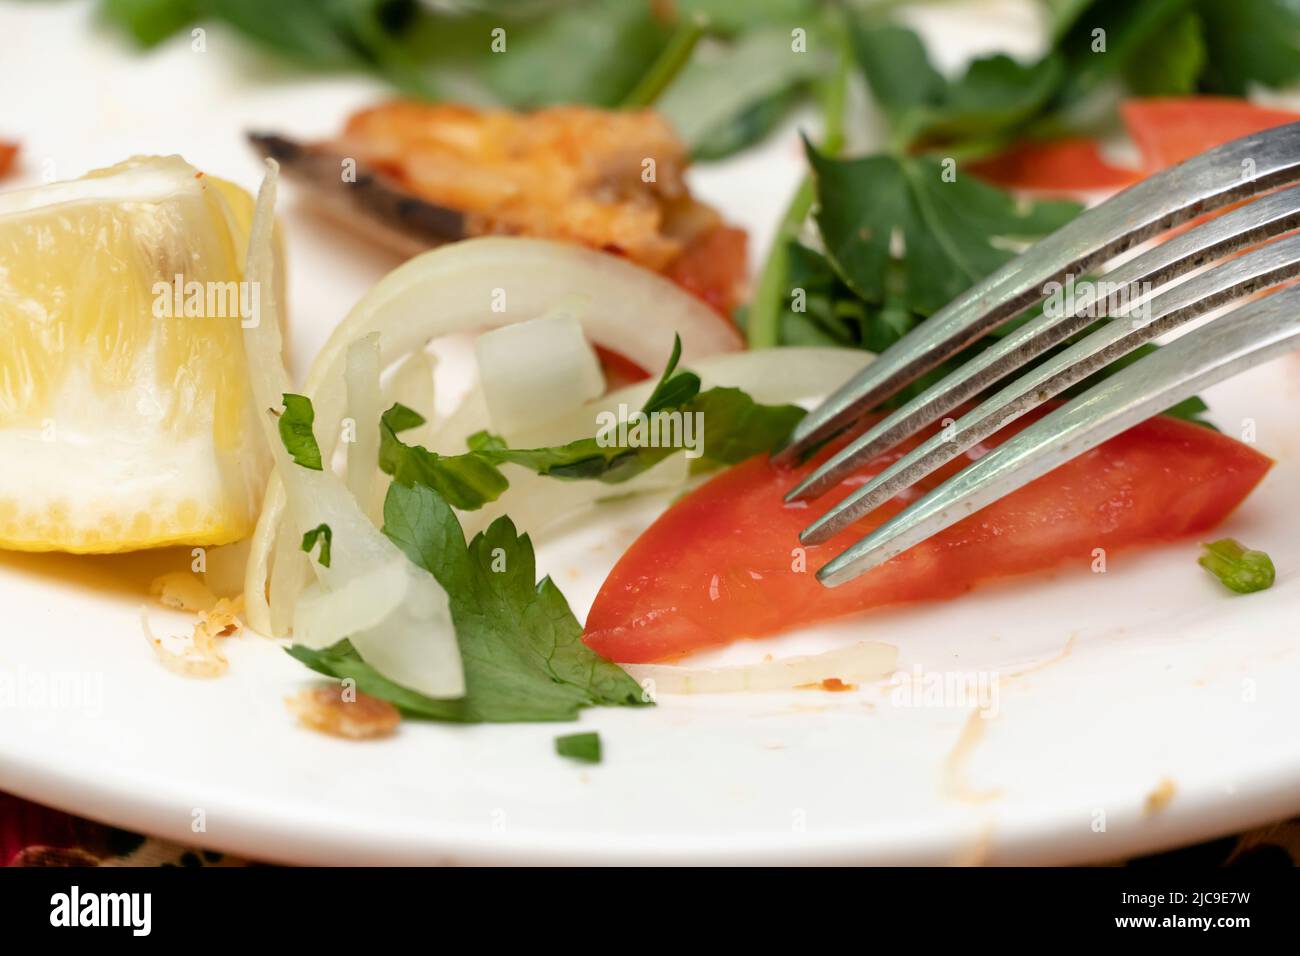 Leftovers on a plate close-up. Eat food with a knife and fork. Delicious lunch, vegetables, proper nutrition. Italian food. Useful menu. Enjoy dinner. Stock Photo